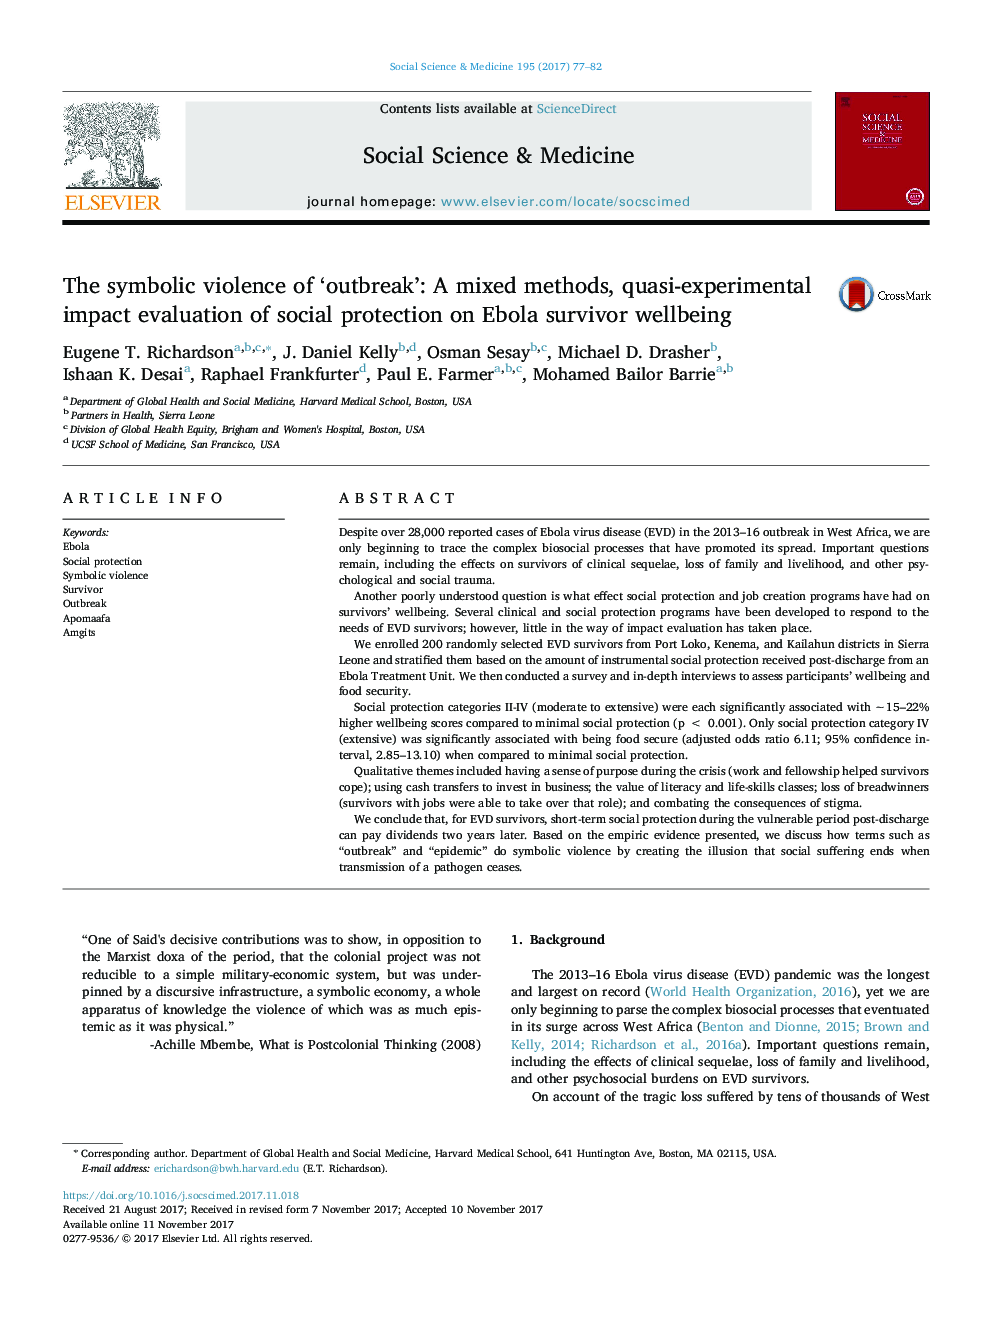 The symbolic violence of 'outbreak': A mixed-methods, quasi-experimental impact evaluation of social protection on Ebola survivor wellbeing